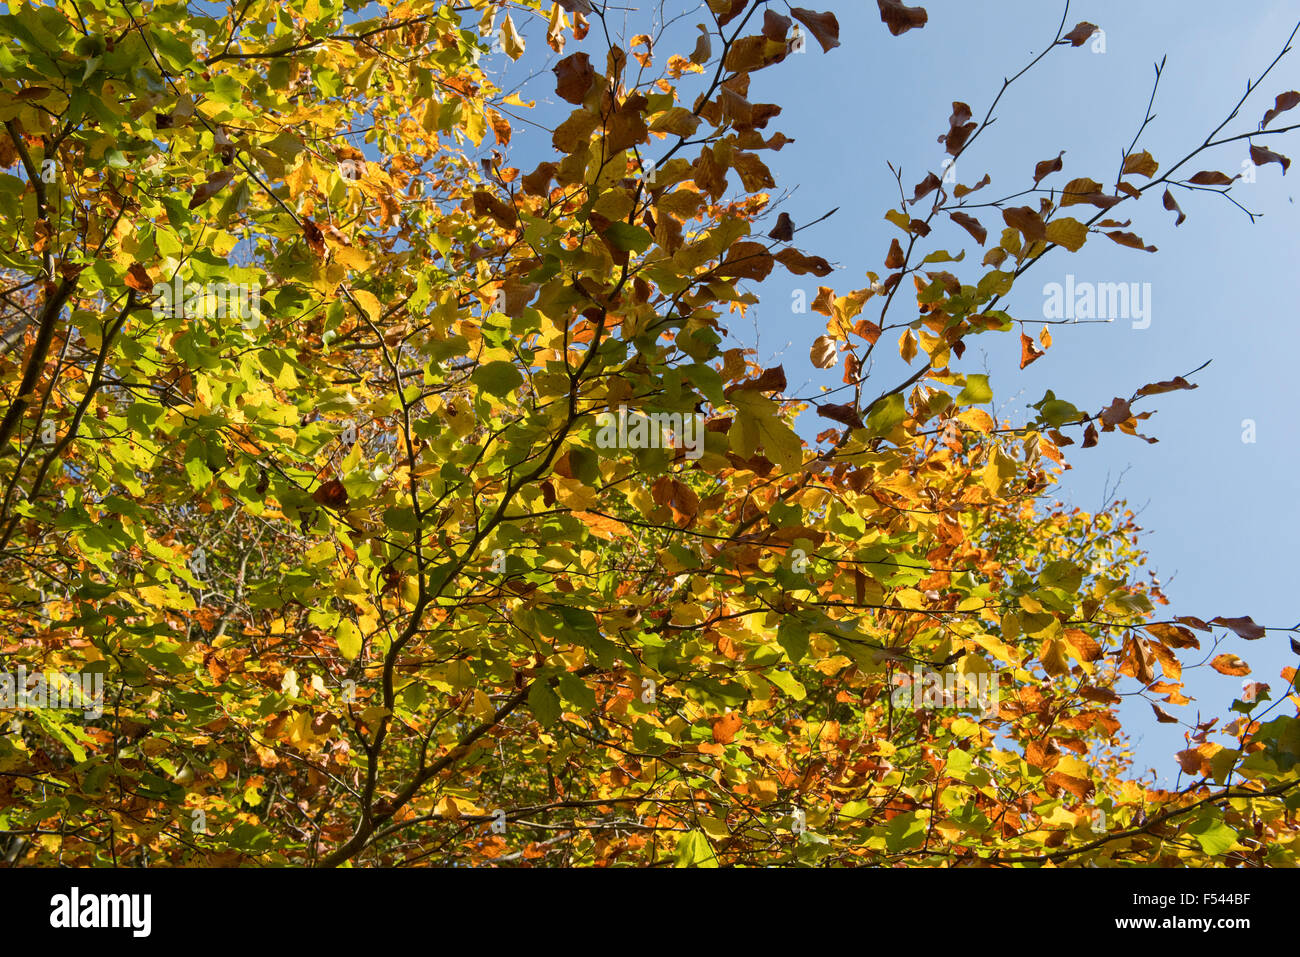 Leaves of golden browns and greens against a blue sky, autumn colours on a beech tree, Berkshire, October Stock Photo